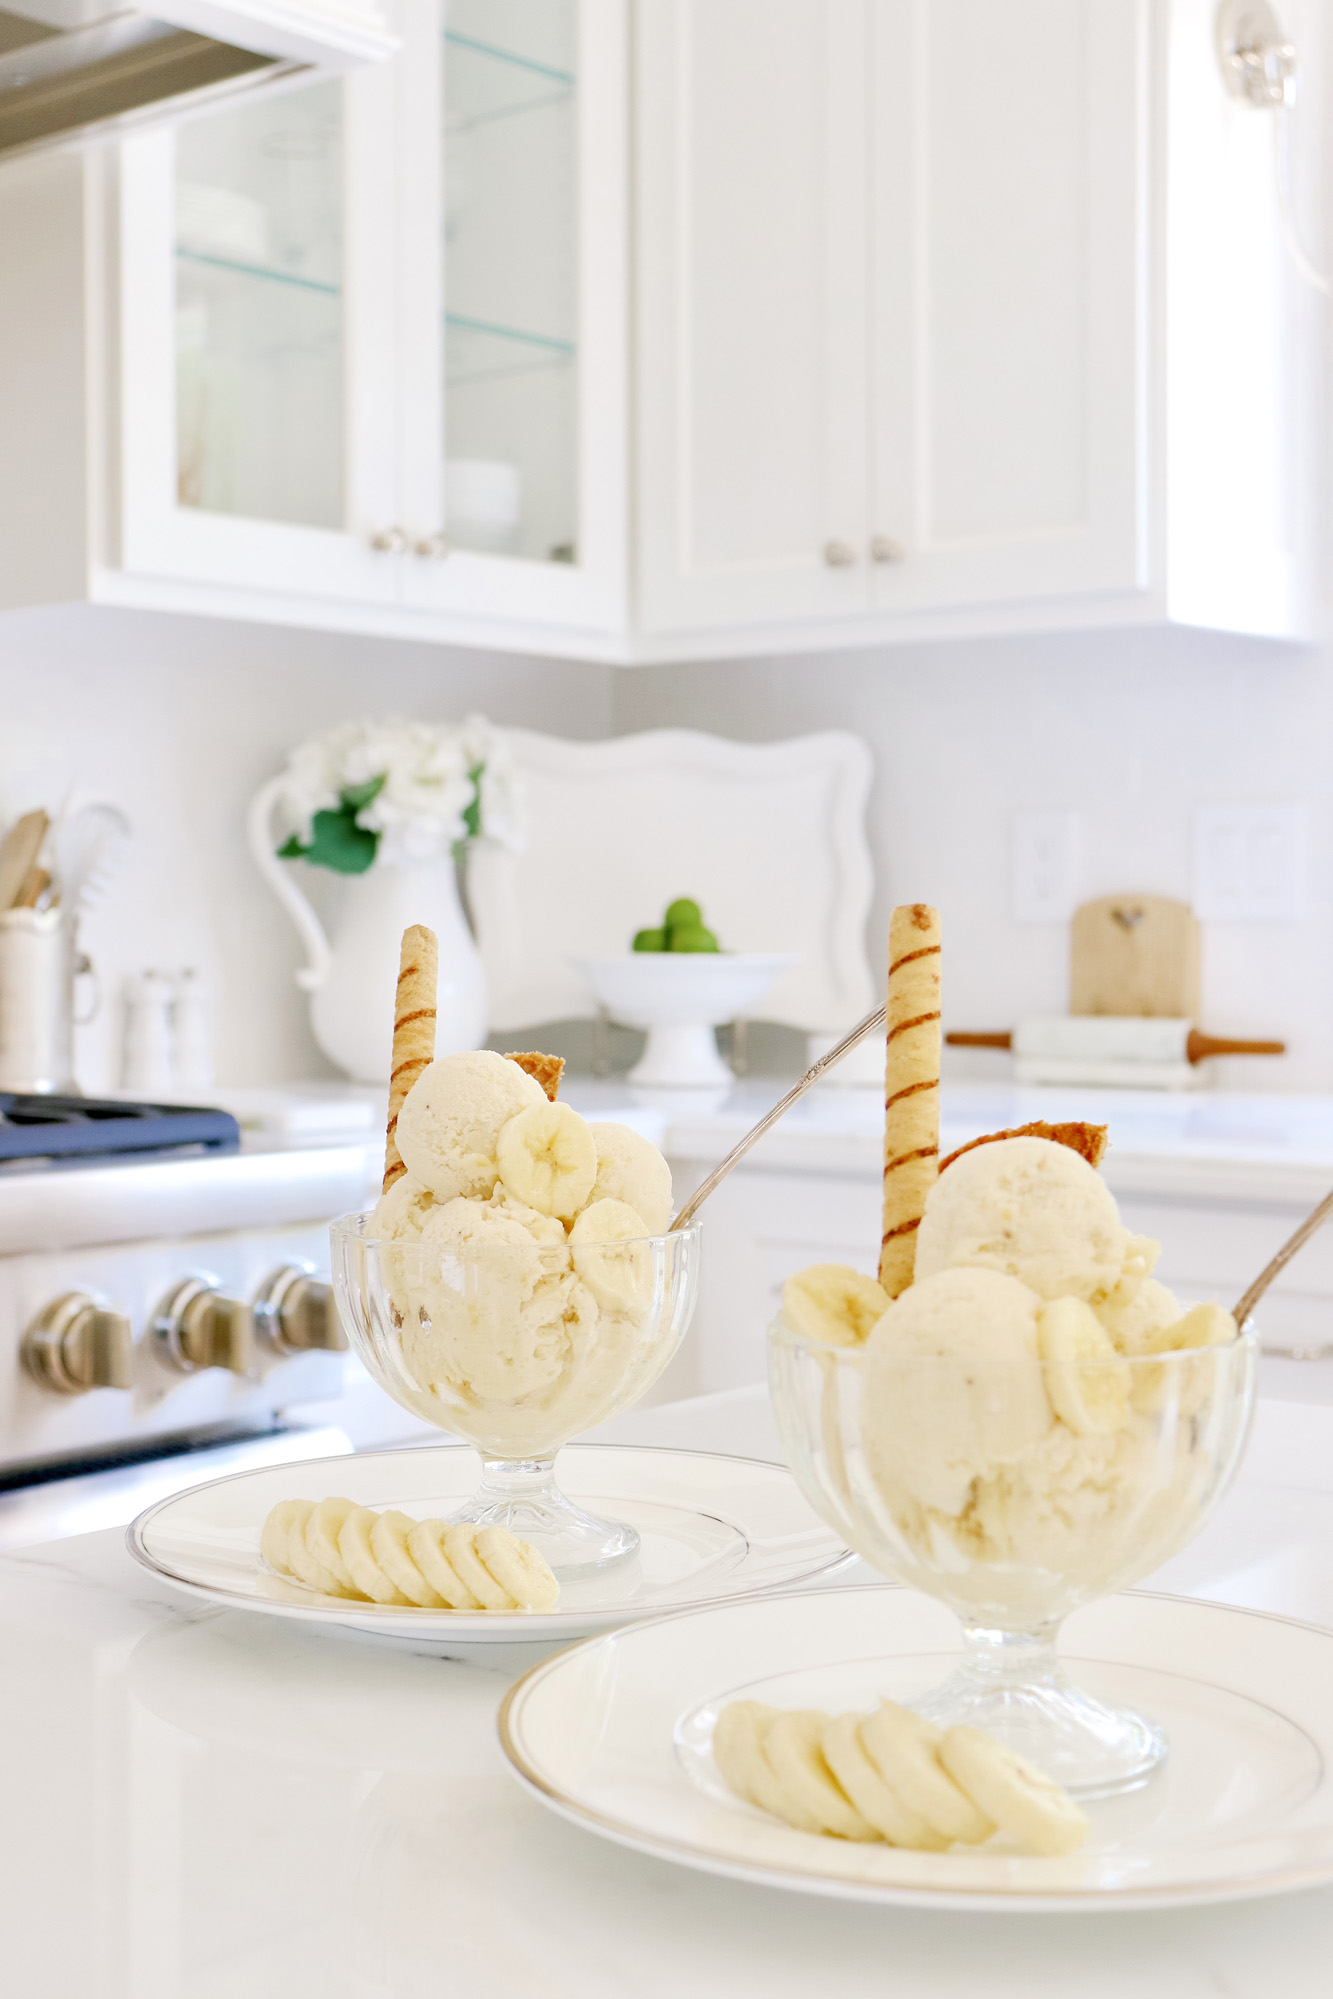 Banana Ice Cream Recipe - Jeff's homemade recipe that is both delicious and fun for all! You can make it full-fat or low-fat, even sugar-free. | Kristy Wicks